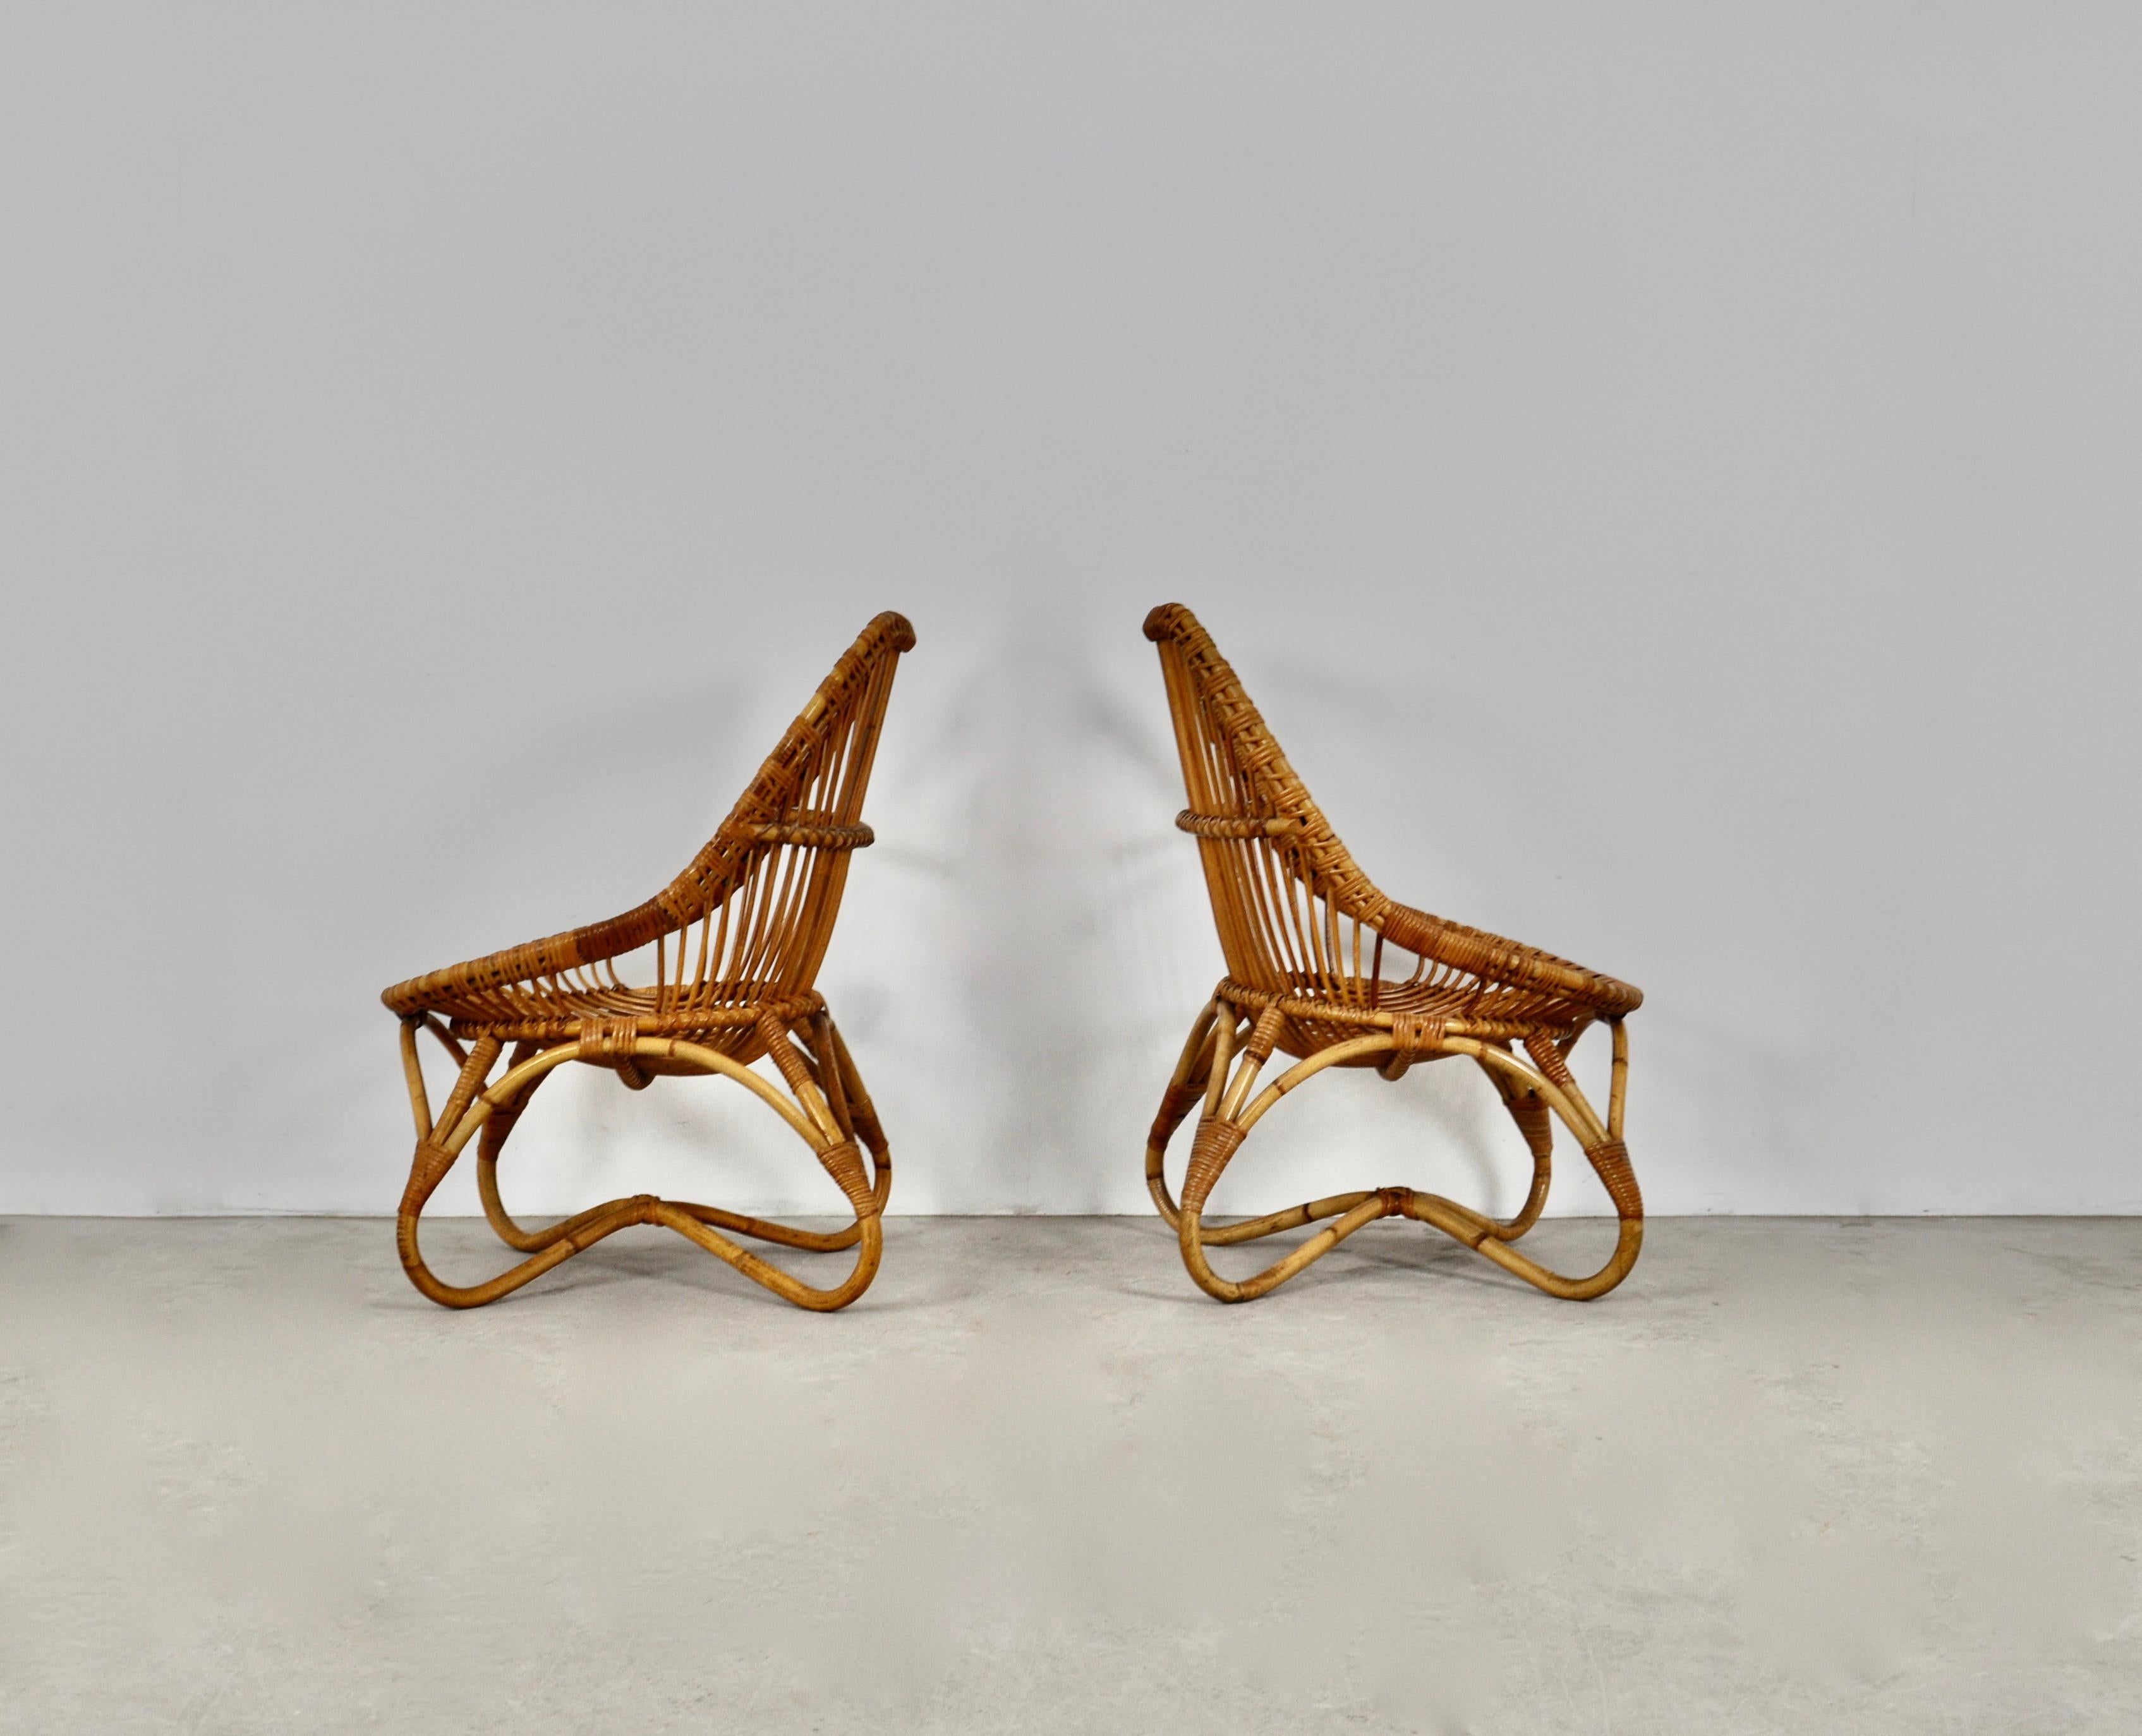 Pair of armchairs in rattan. Seat height: 38cm. Wear due to time and age of the chairs.